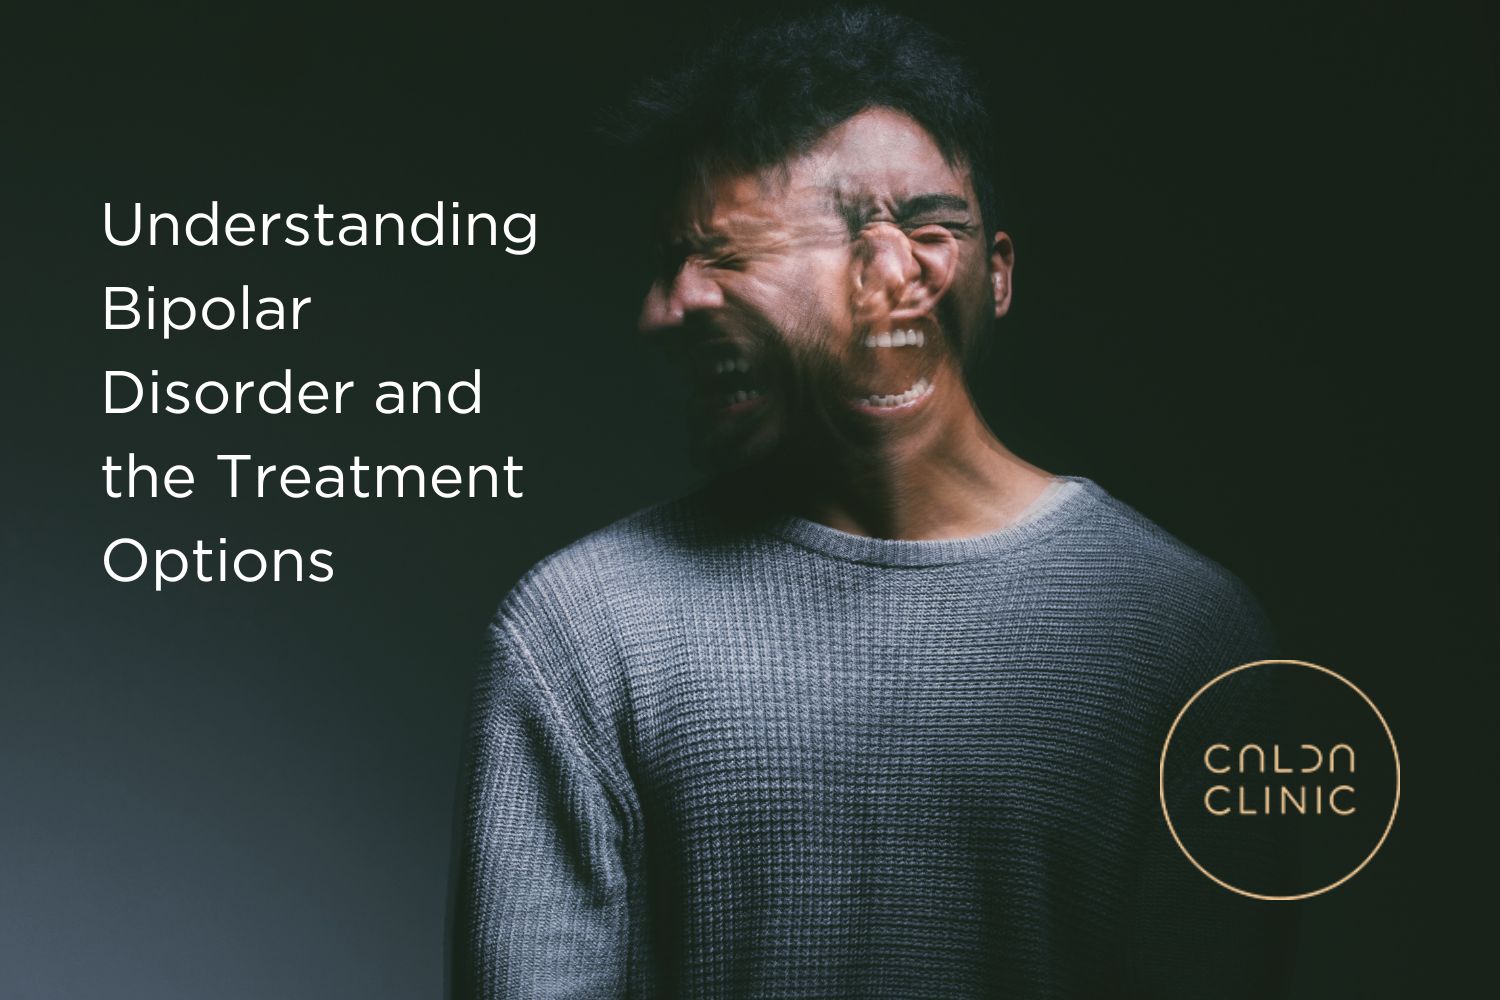 Understanding Bipolar Disorder and the Treatment Options